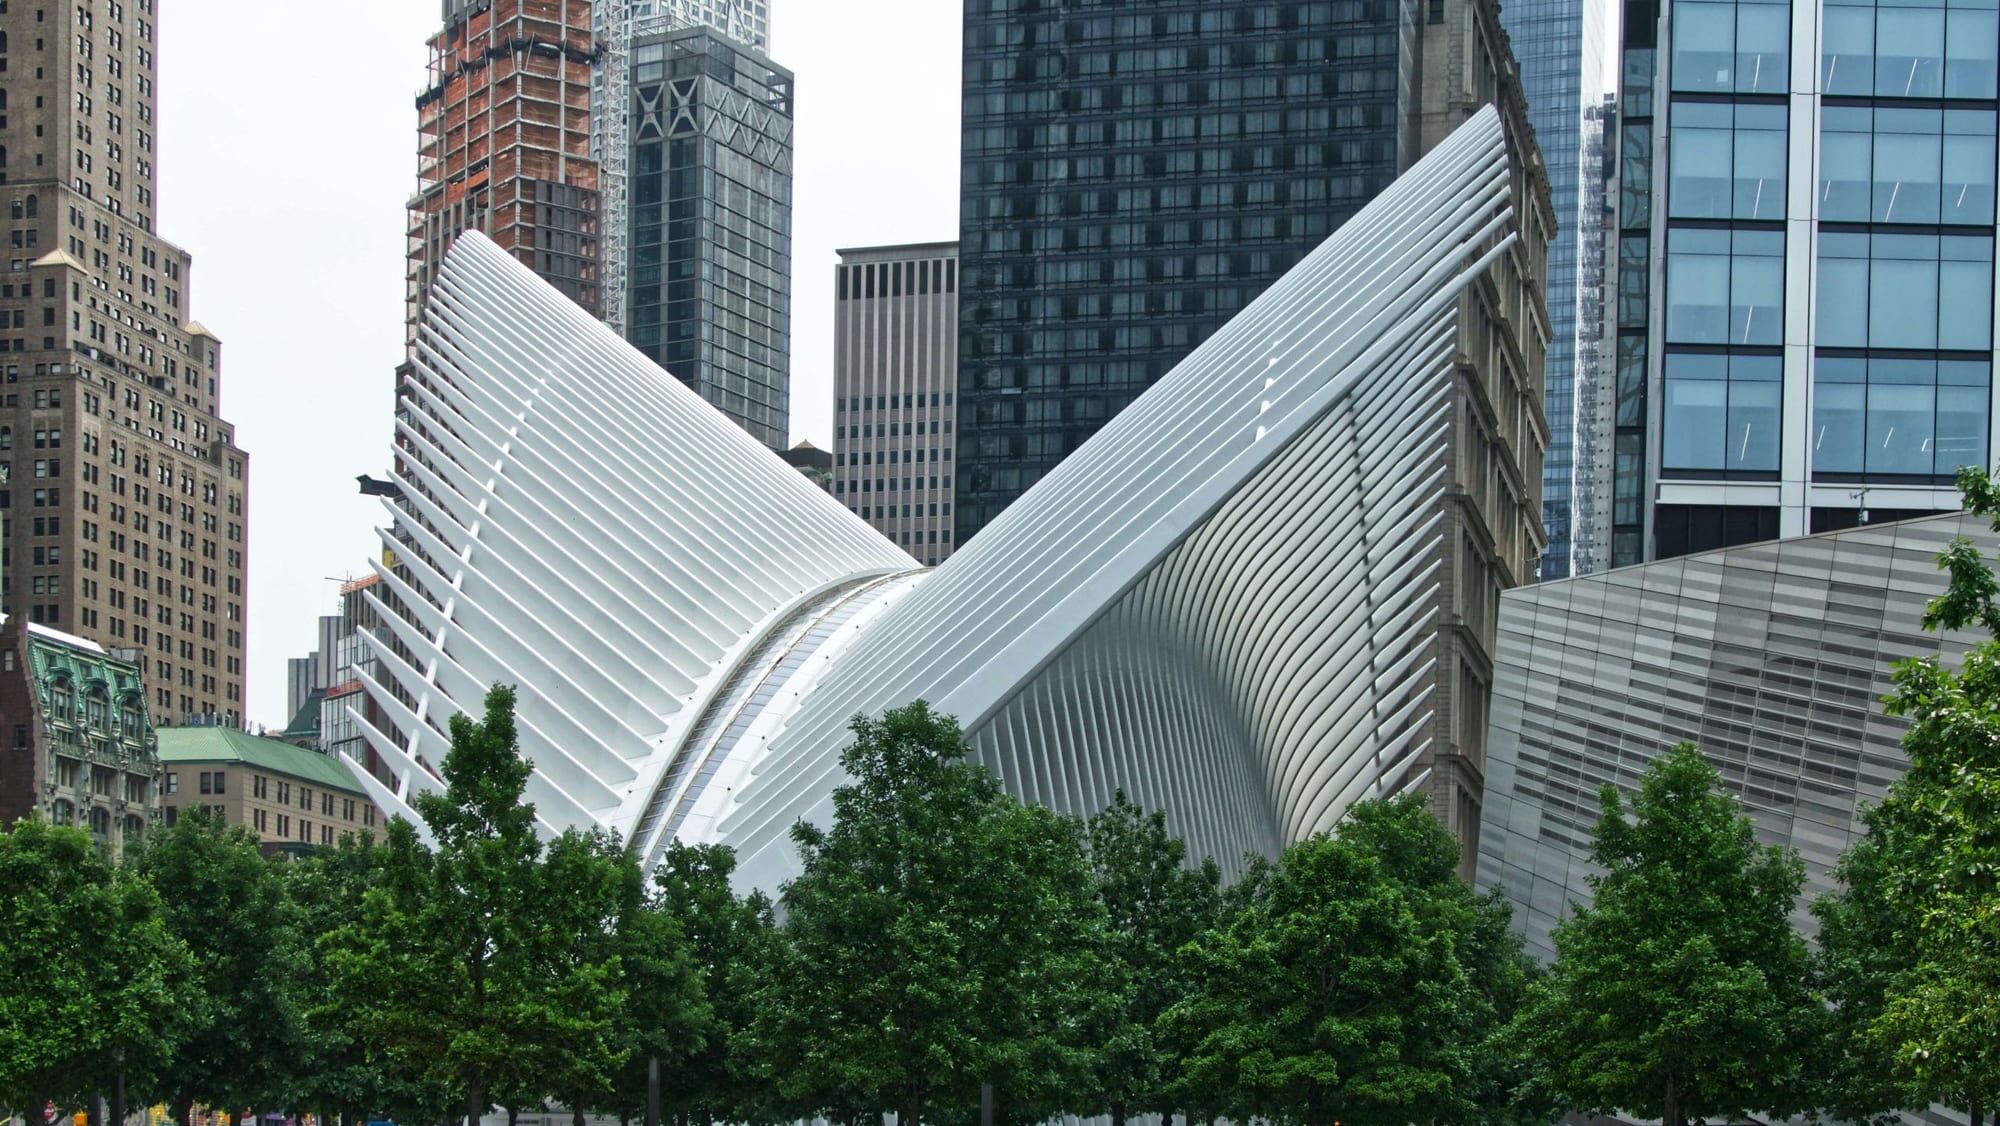 The World Trade Center's restored Oculus transportation hub, also completed by Calatrava.